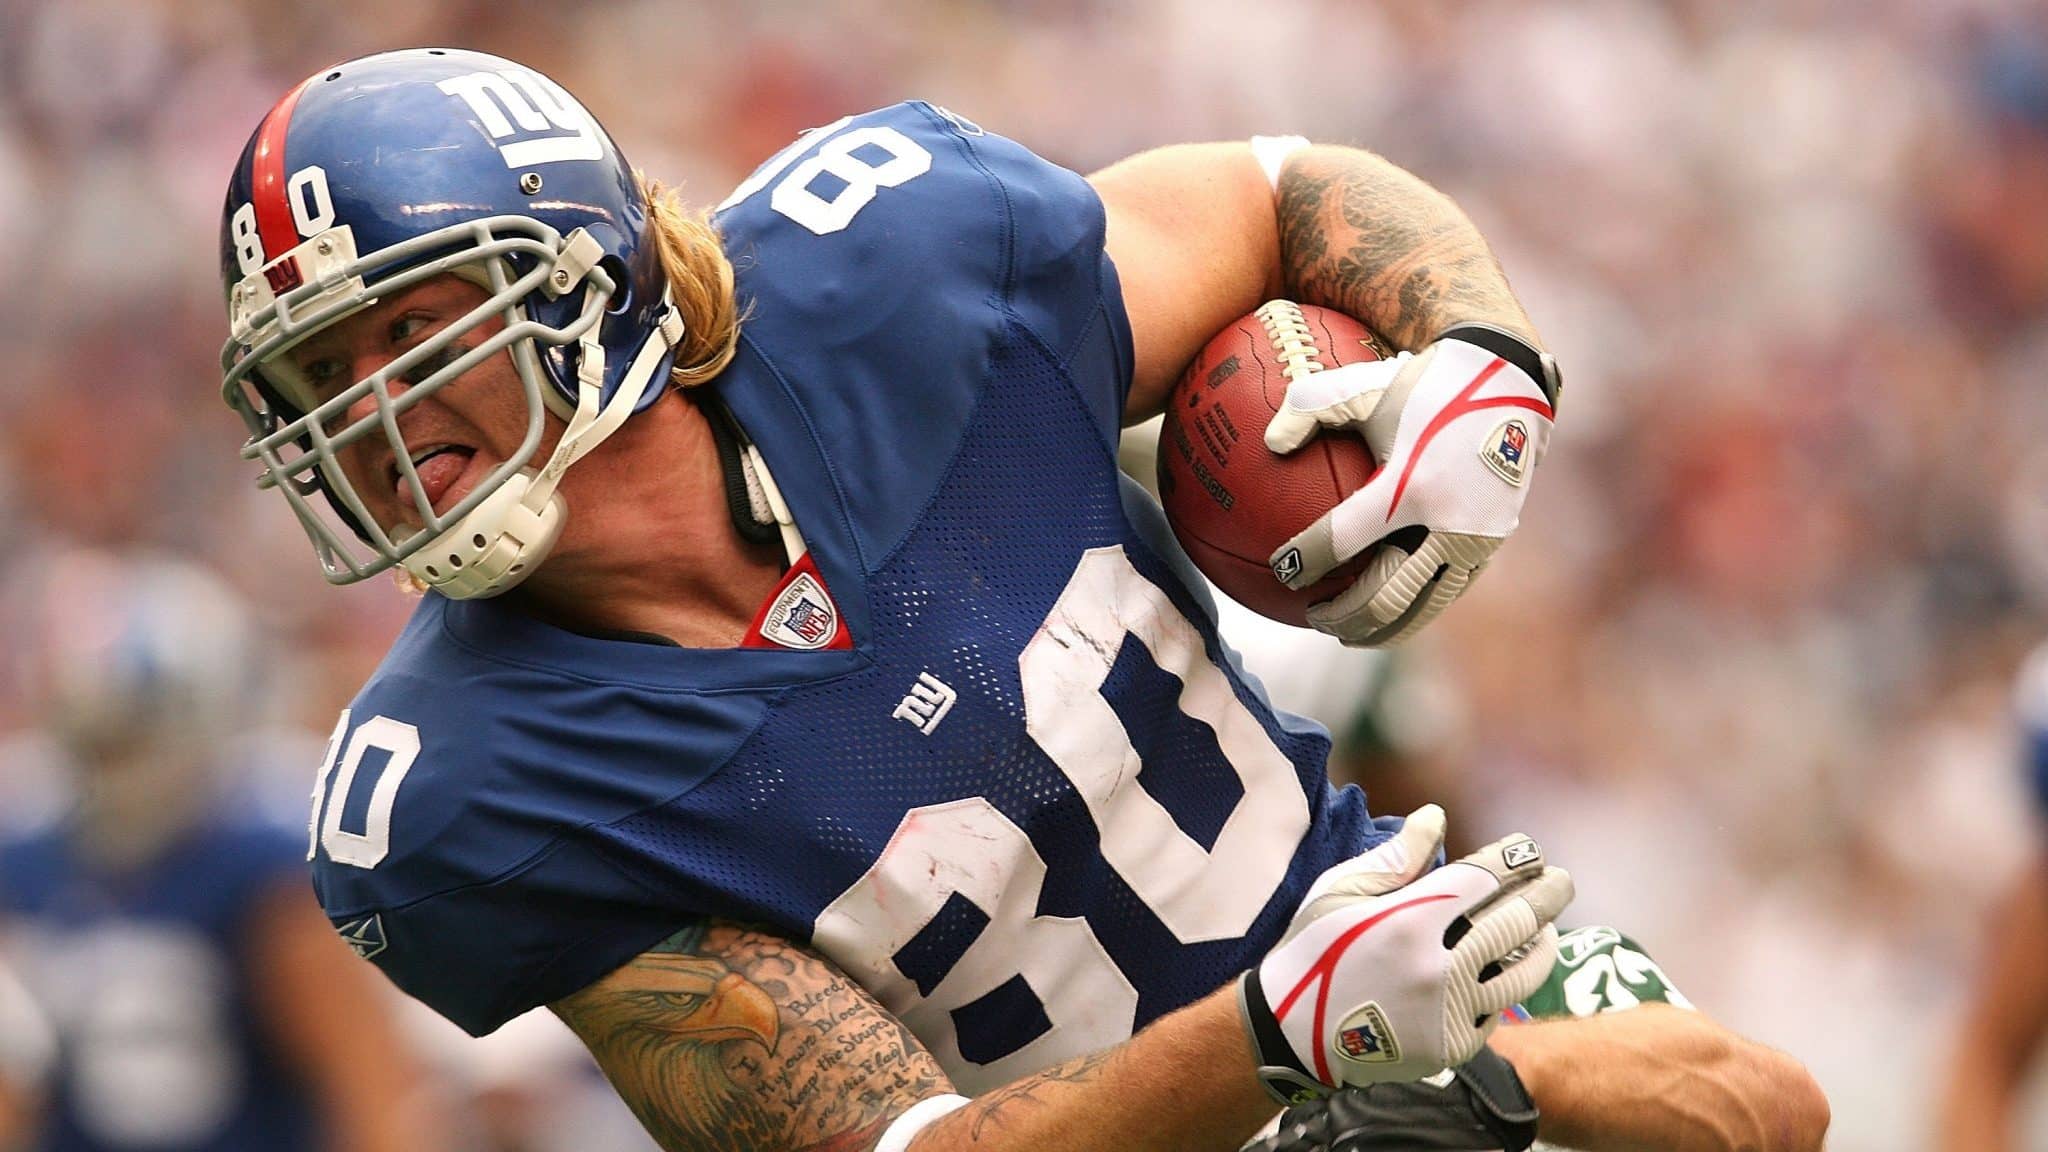 EAST RUTHERFORD, NJ - OCTOBER 7: Jeremy Shockey #80 of the New York Giants runs the ball against the New York Jets at Giants Stadium on October 7, 2007 in East Rutherford, New Jersey.